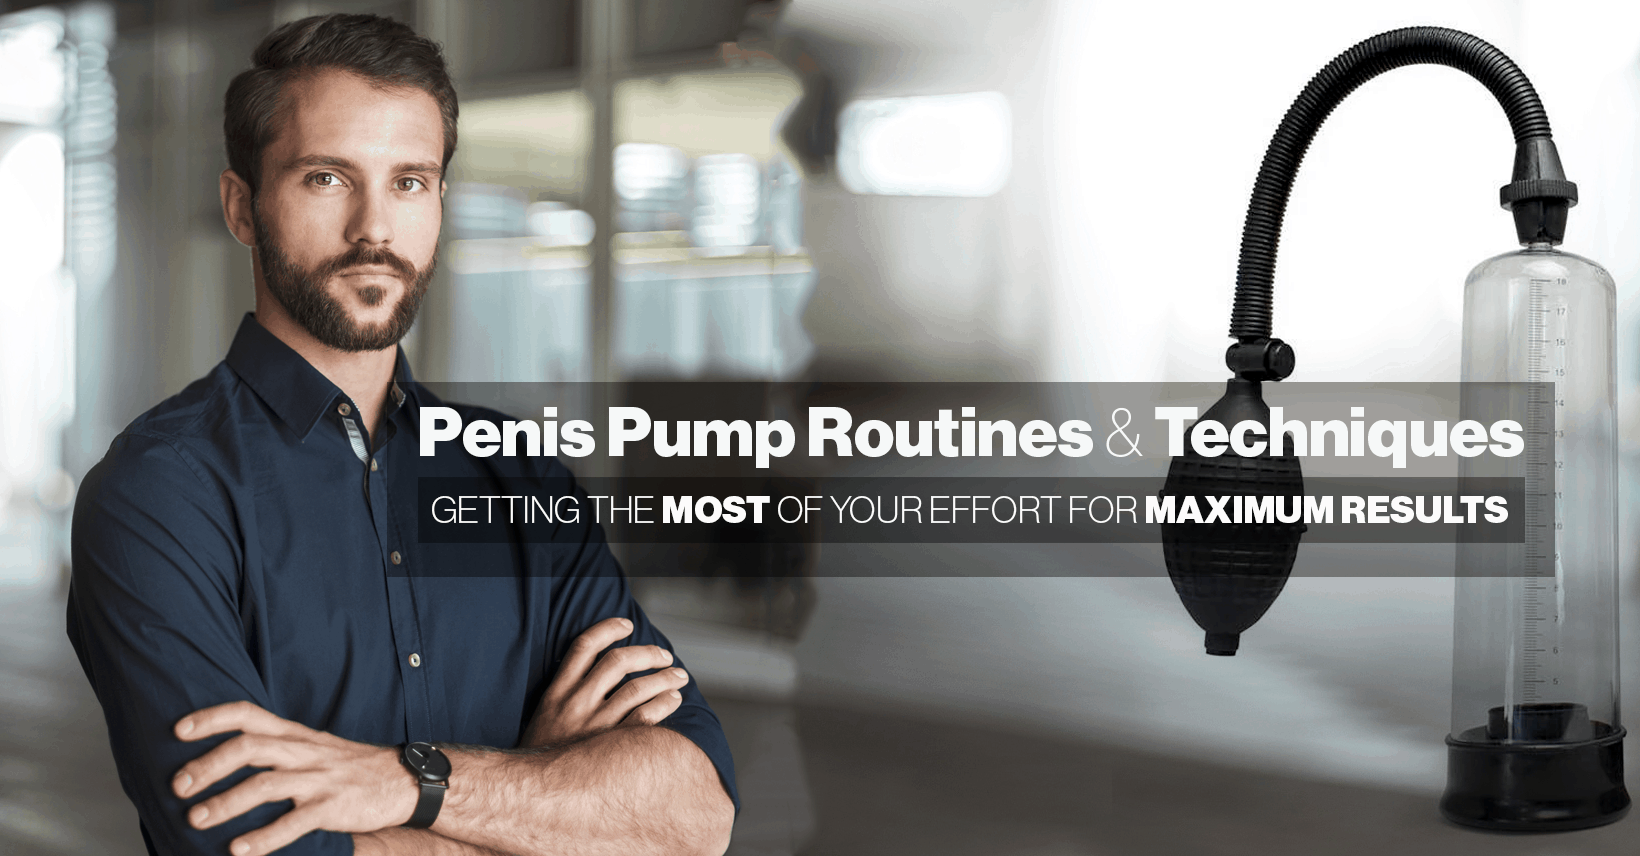 What You Need To Know Before Buying A Penis Pump